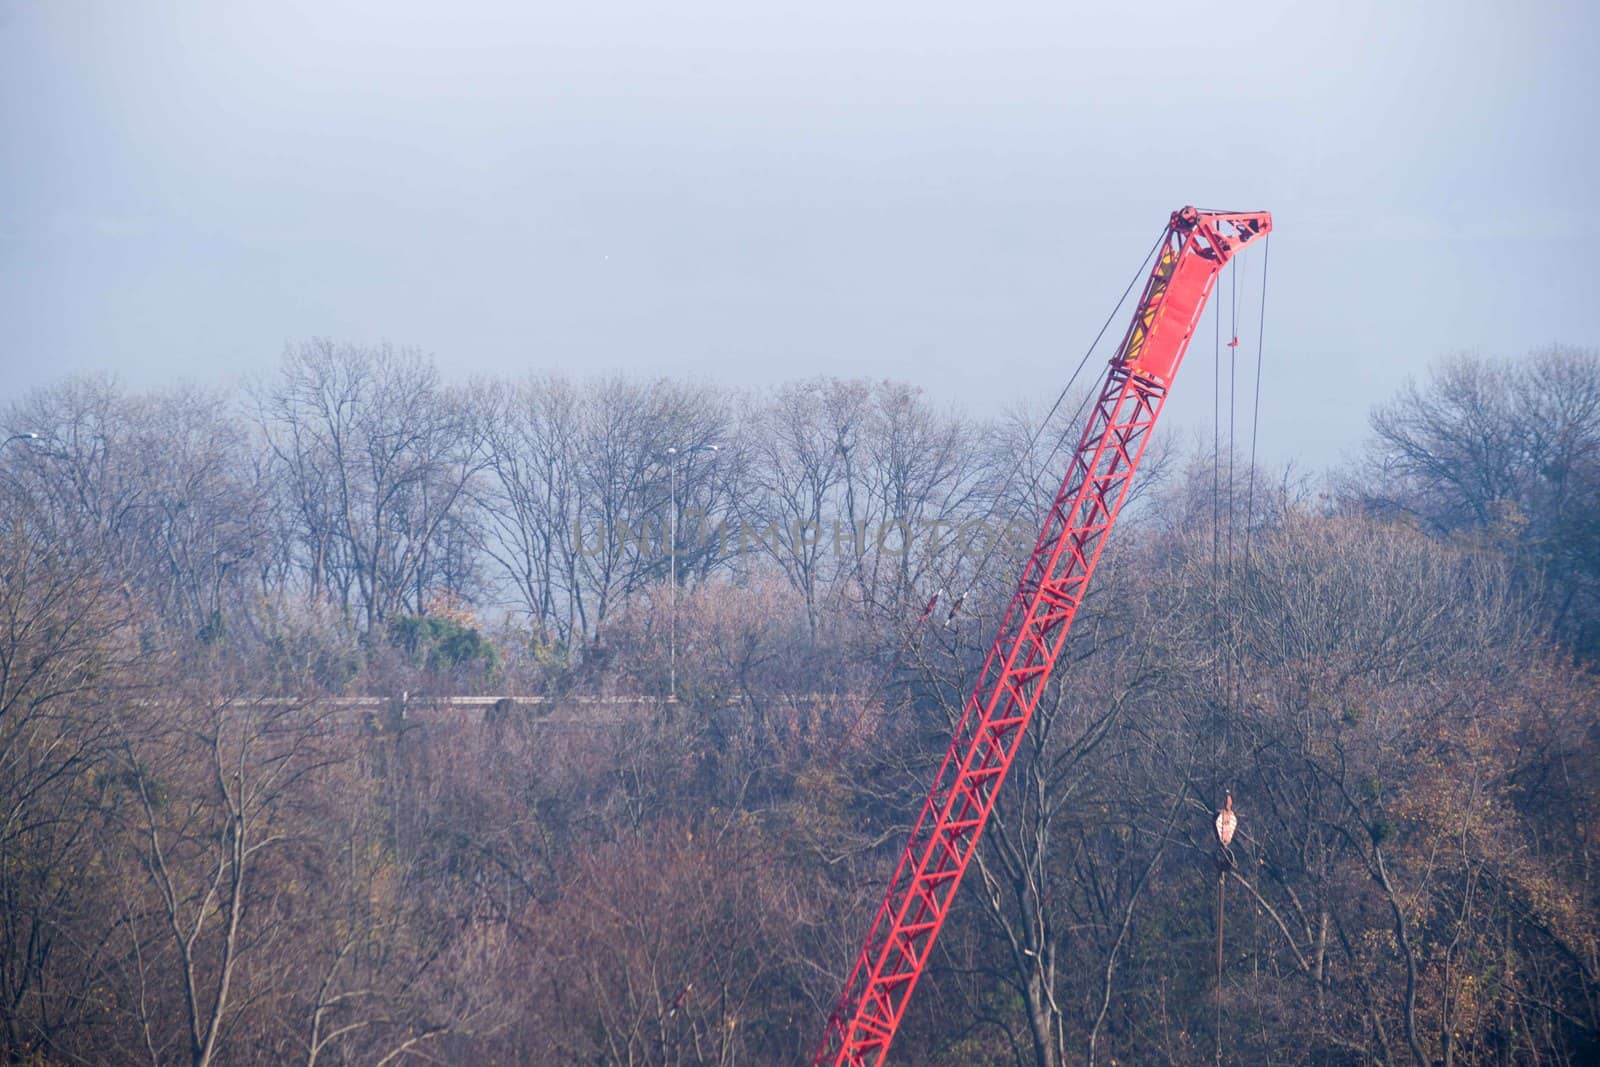 Construction process with construction automotive crane with red gibbet. Autumn fog and river bridge  on blurred background. Forest around crane. by alexsdriver